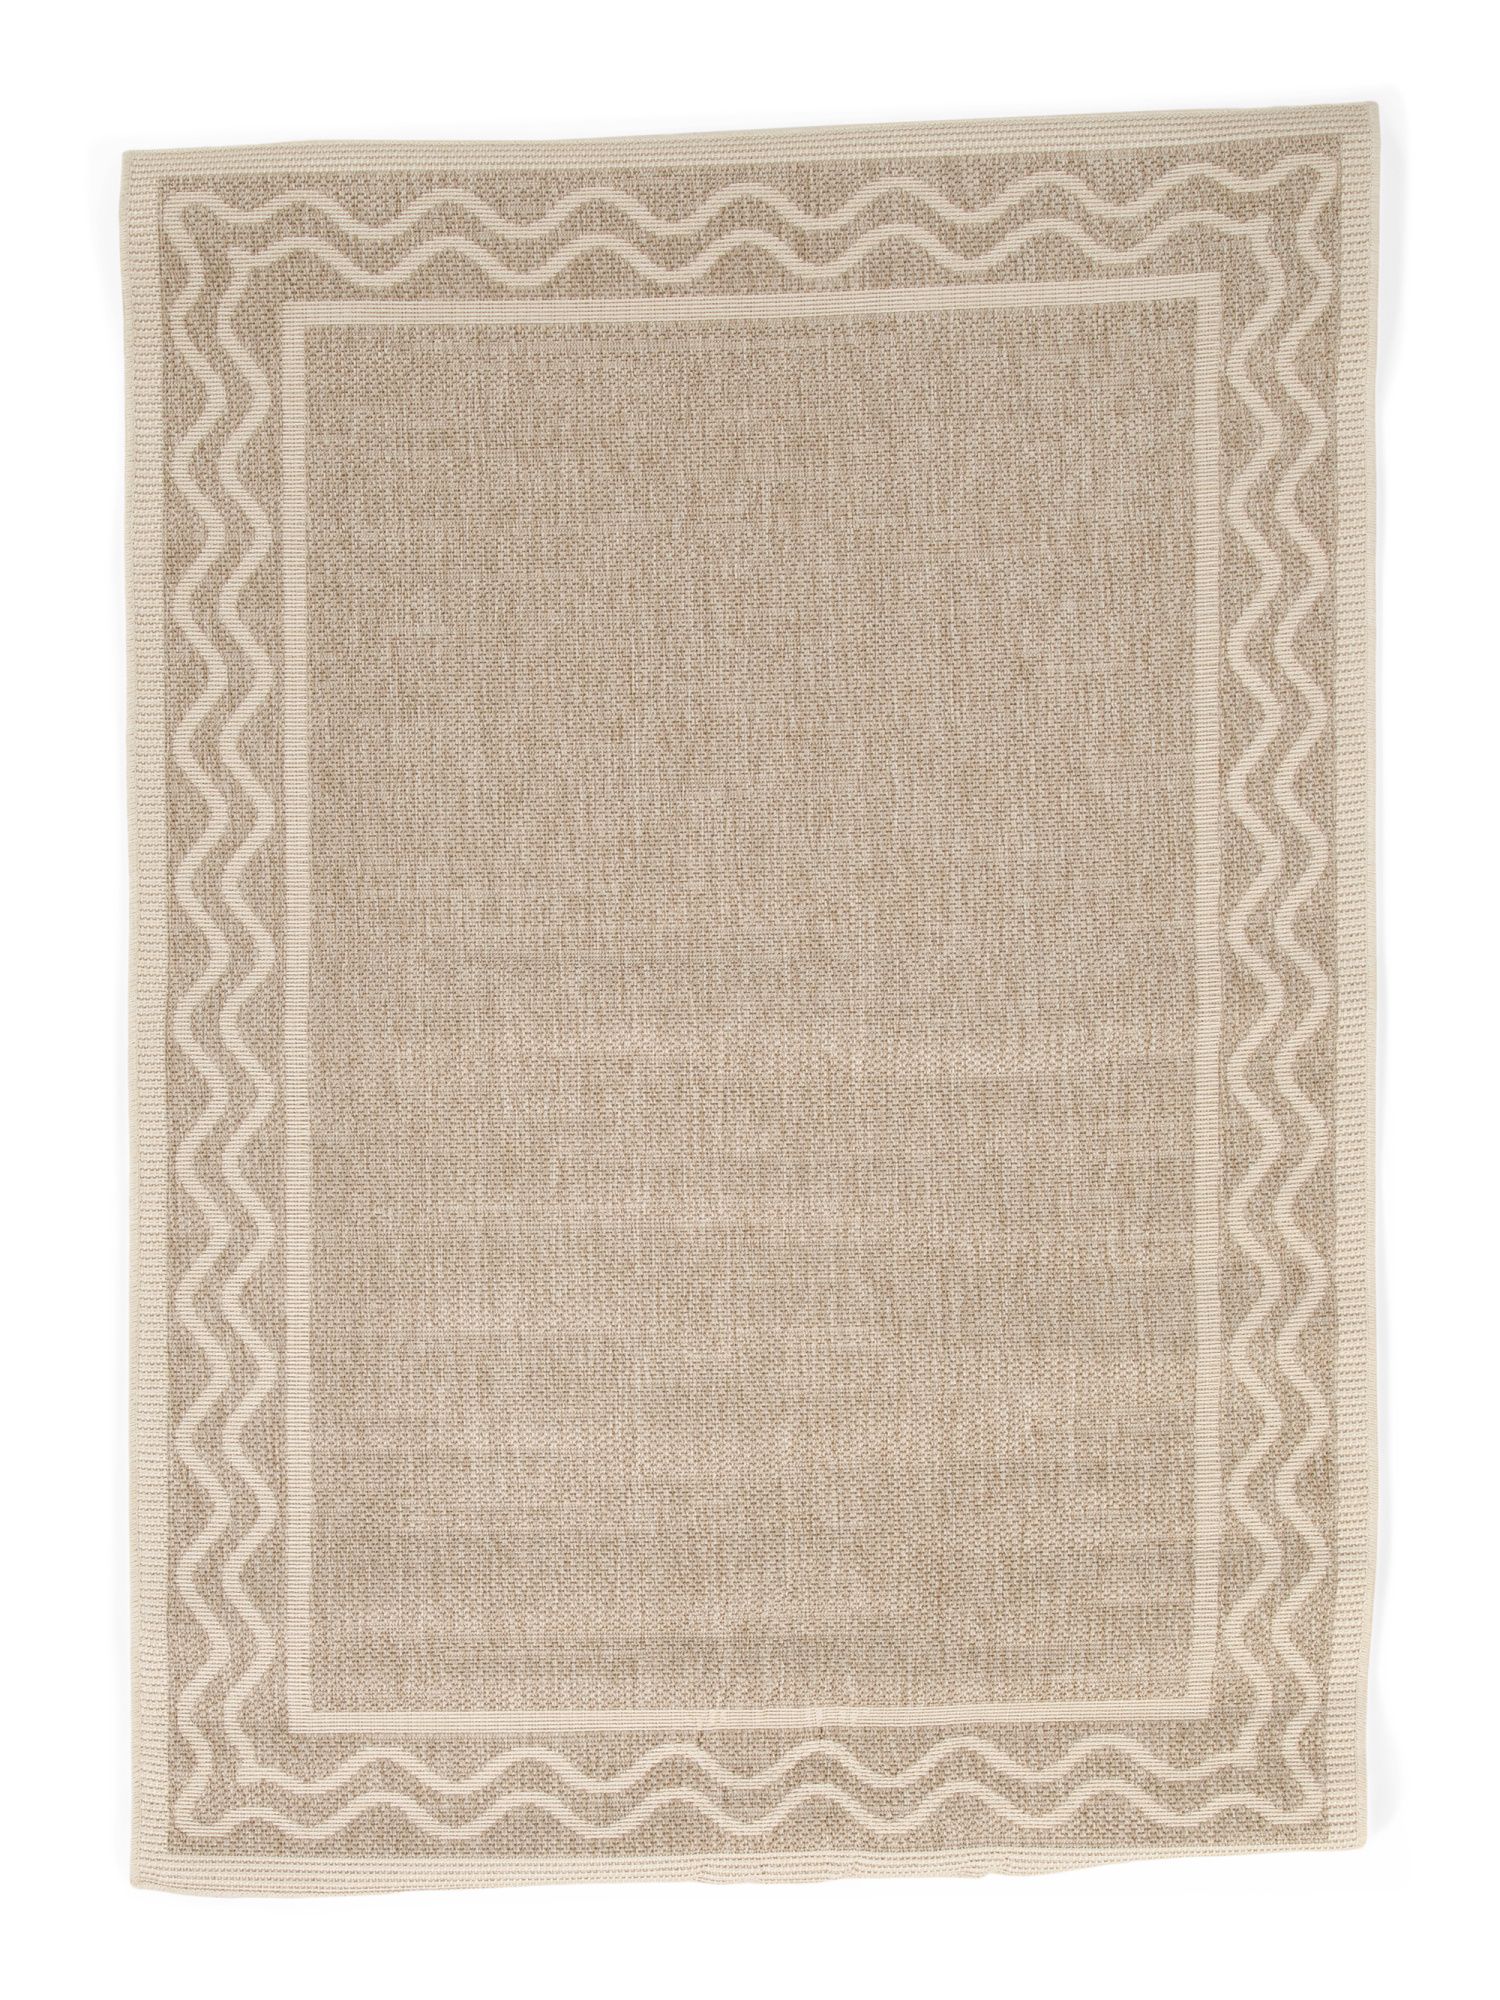 Made In Turkey 4x6 Outdoor Scalloped Rug | Marshalls